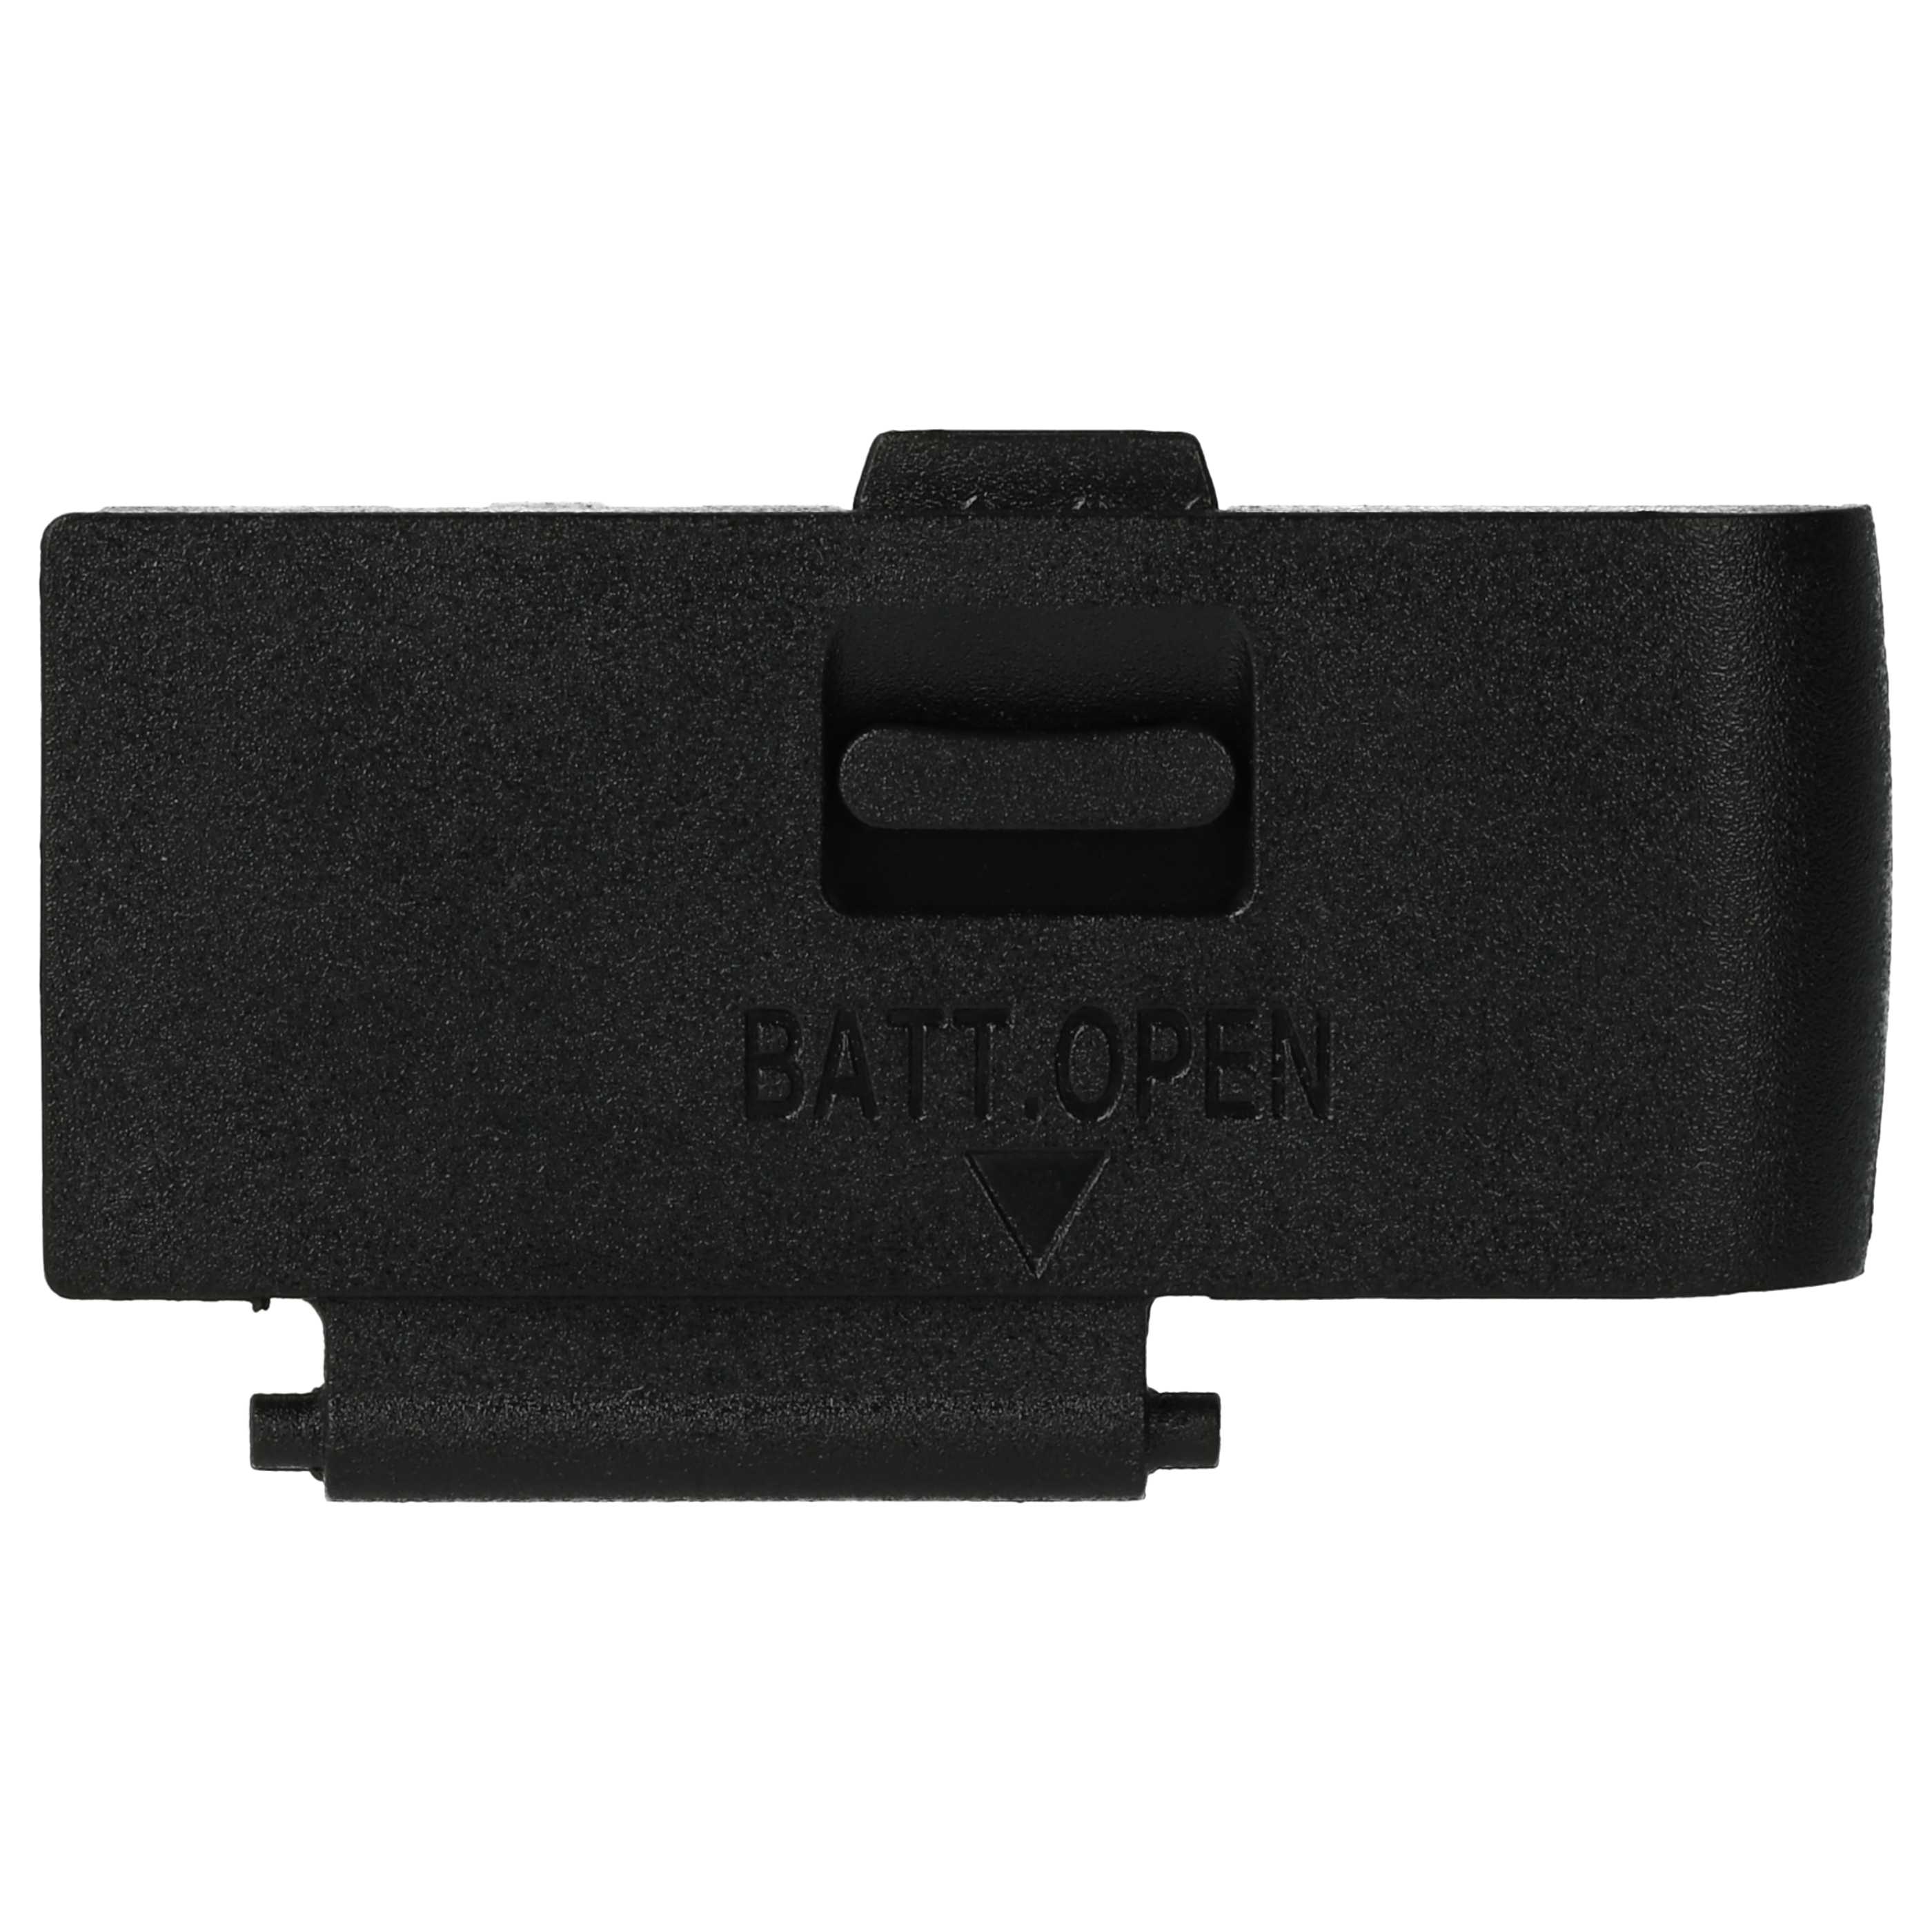 Battery Door Cover suitable for Canon EOS 700D, Rebel T4i, Rebel T5i, Kiss X7i, Kiss X6, 650D Camera, Battery 